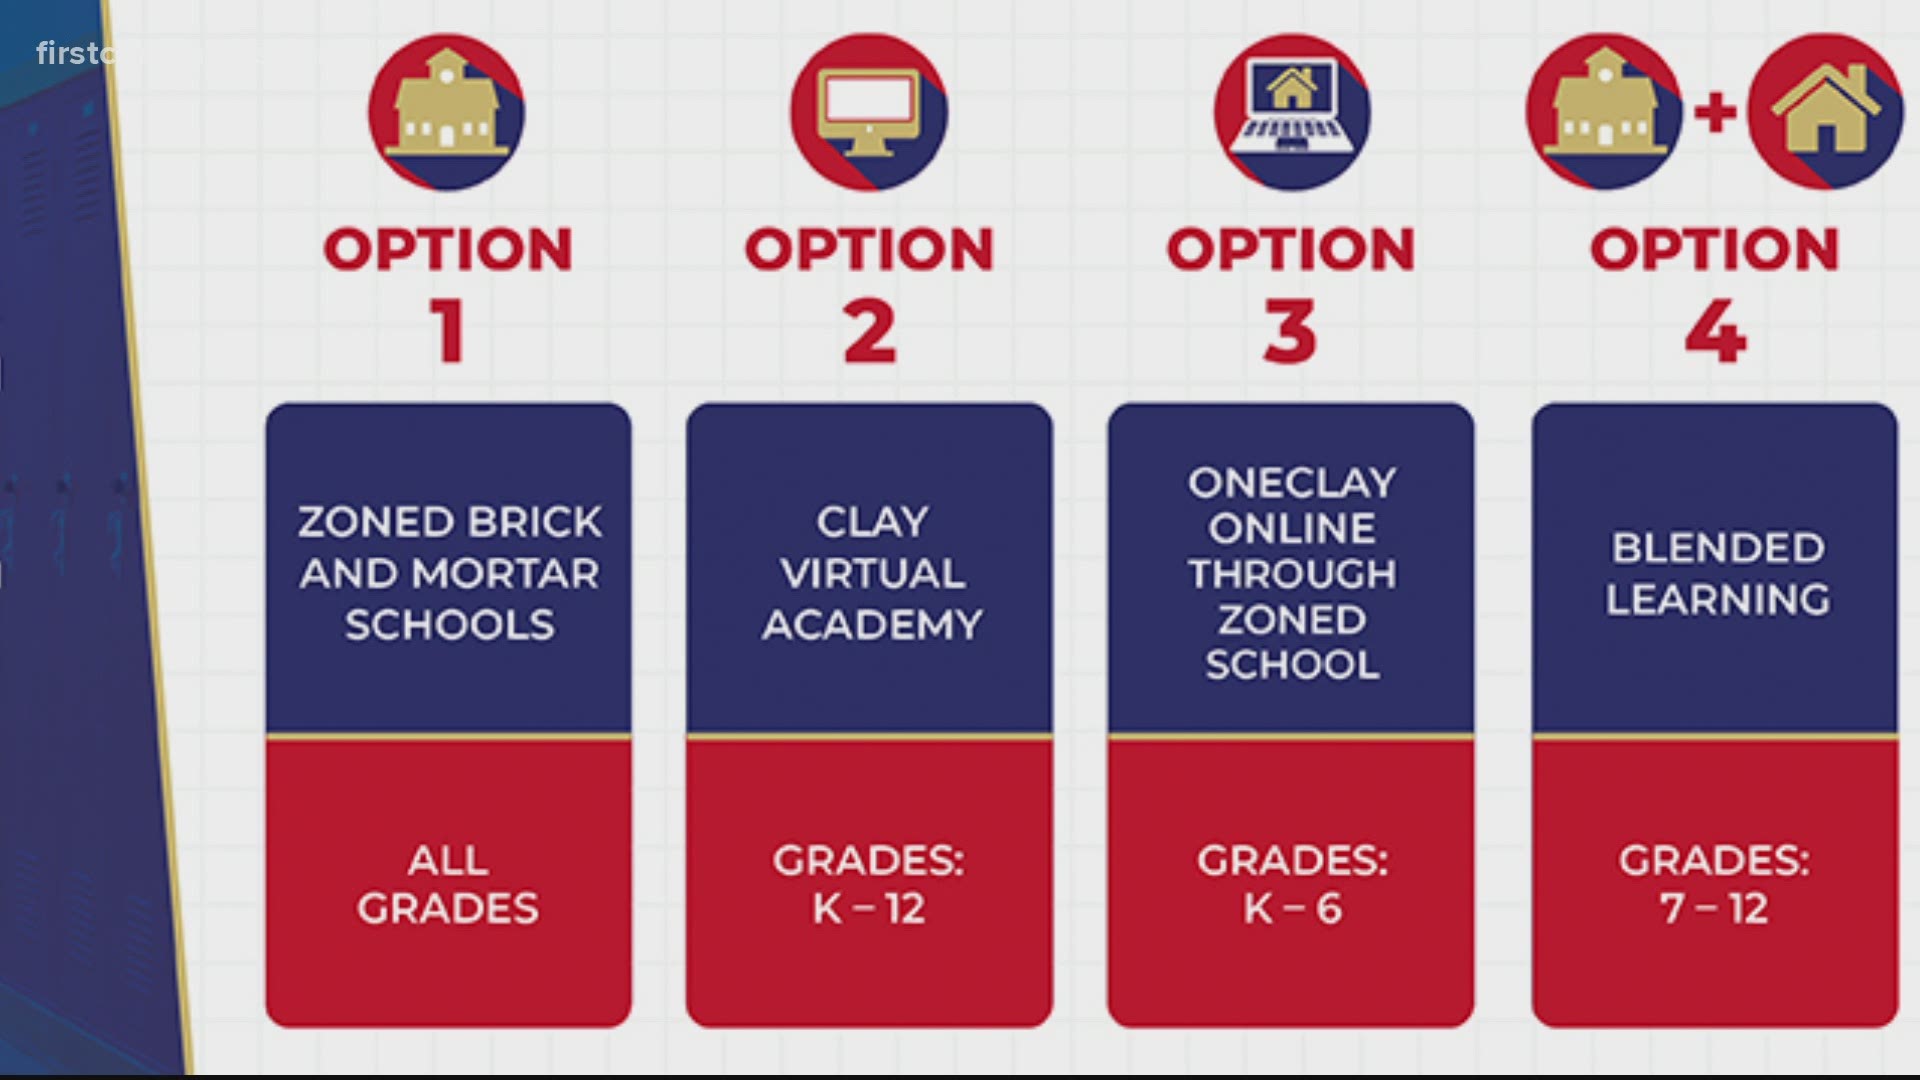 Parents have until Friday, July 17, to choose one of four options for the 2020 through 2021 school year.